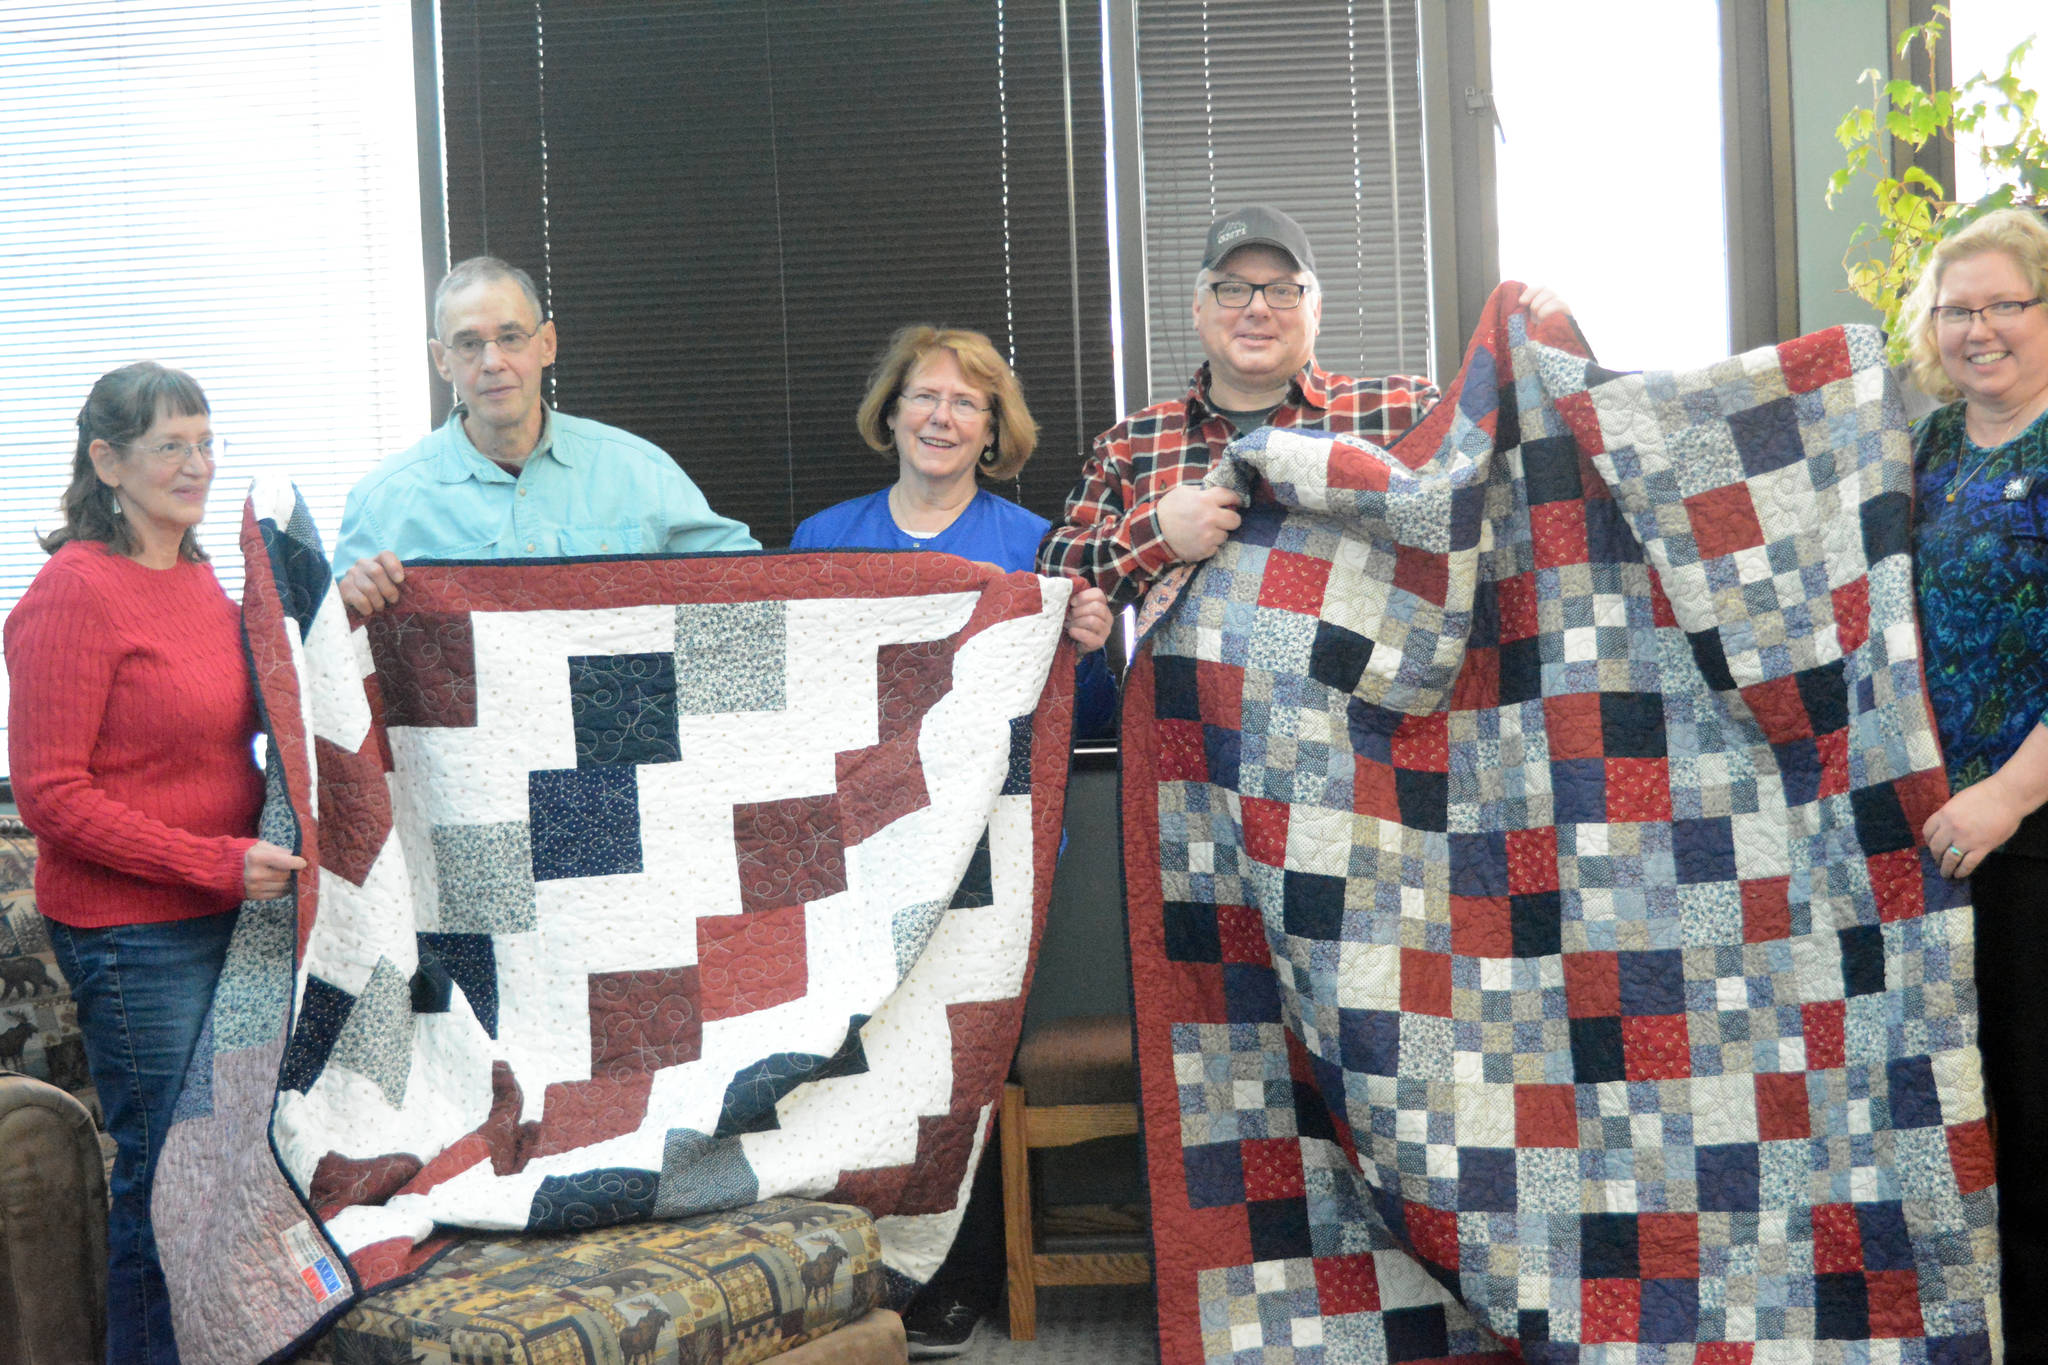 Jay Greene, second from left, and Andrew Hodnik, second from right, on Tuesday, Feb. 6, 2018, hold up Quilts of Valor given to them and made by Dana Moore, far left, and Connie Isenhour, far right. The quilts are a project of Faith Friday Friends, a group at Faith Lutheran Church. Under the national program volutneers make quilts to honor service members and veterans touched by war. Green flew 196 combat missions in Vietnam as a U.S. Navy pilot from 1967-68 and Hodnik served in the U.S. Army as a combat engineer from 1989-93, including tours in Operation Desert Storm and Somalia. In the middle is Hodnik’s mother, Dr. Vicky Hodnik. The quilts were presented at Hodnik’s dental office in Homer, Alaska. (Photo by Michael Armstrong, Homer News)